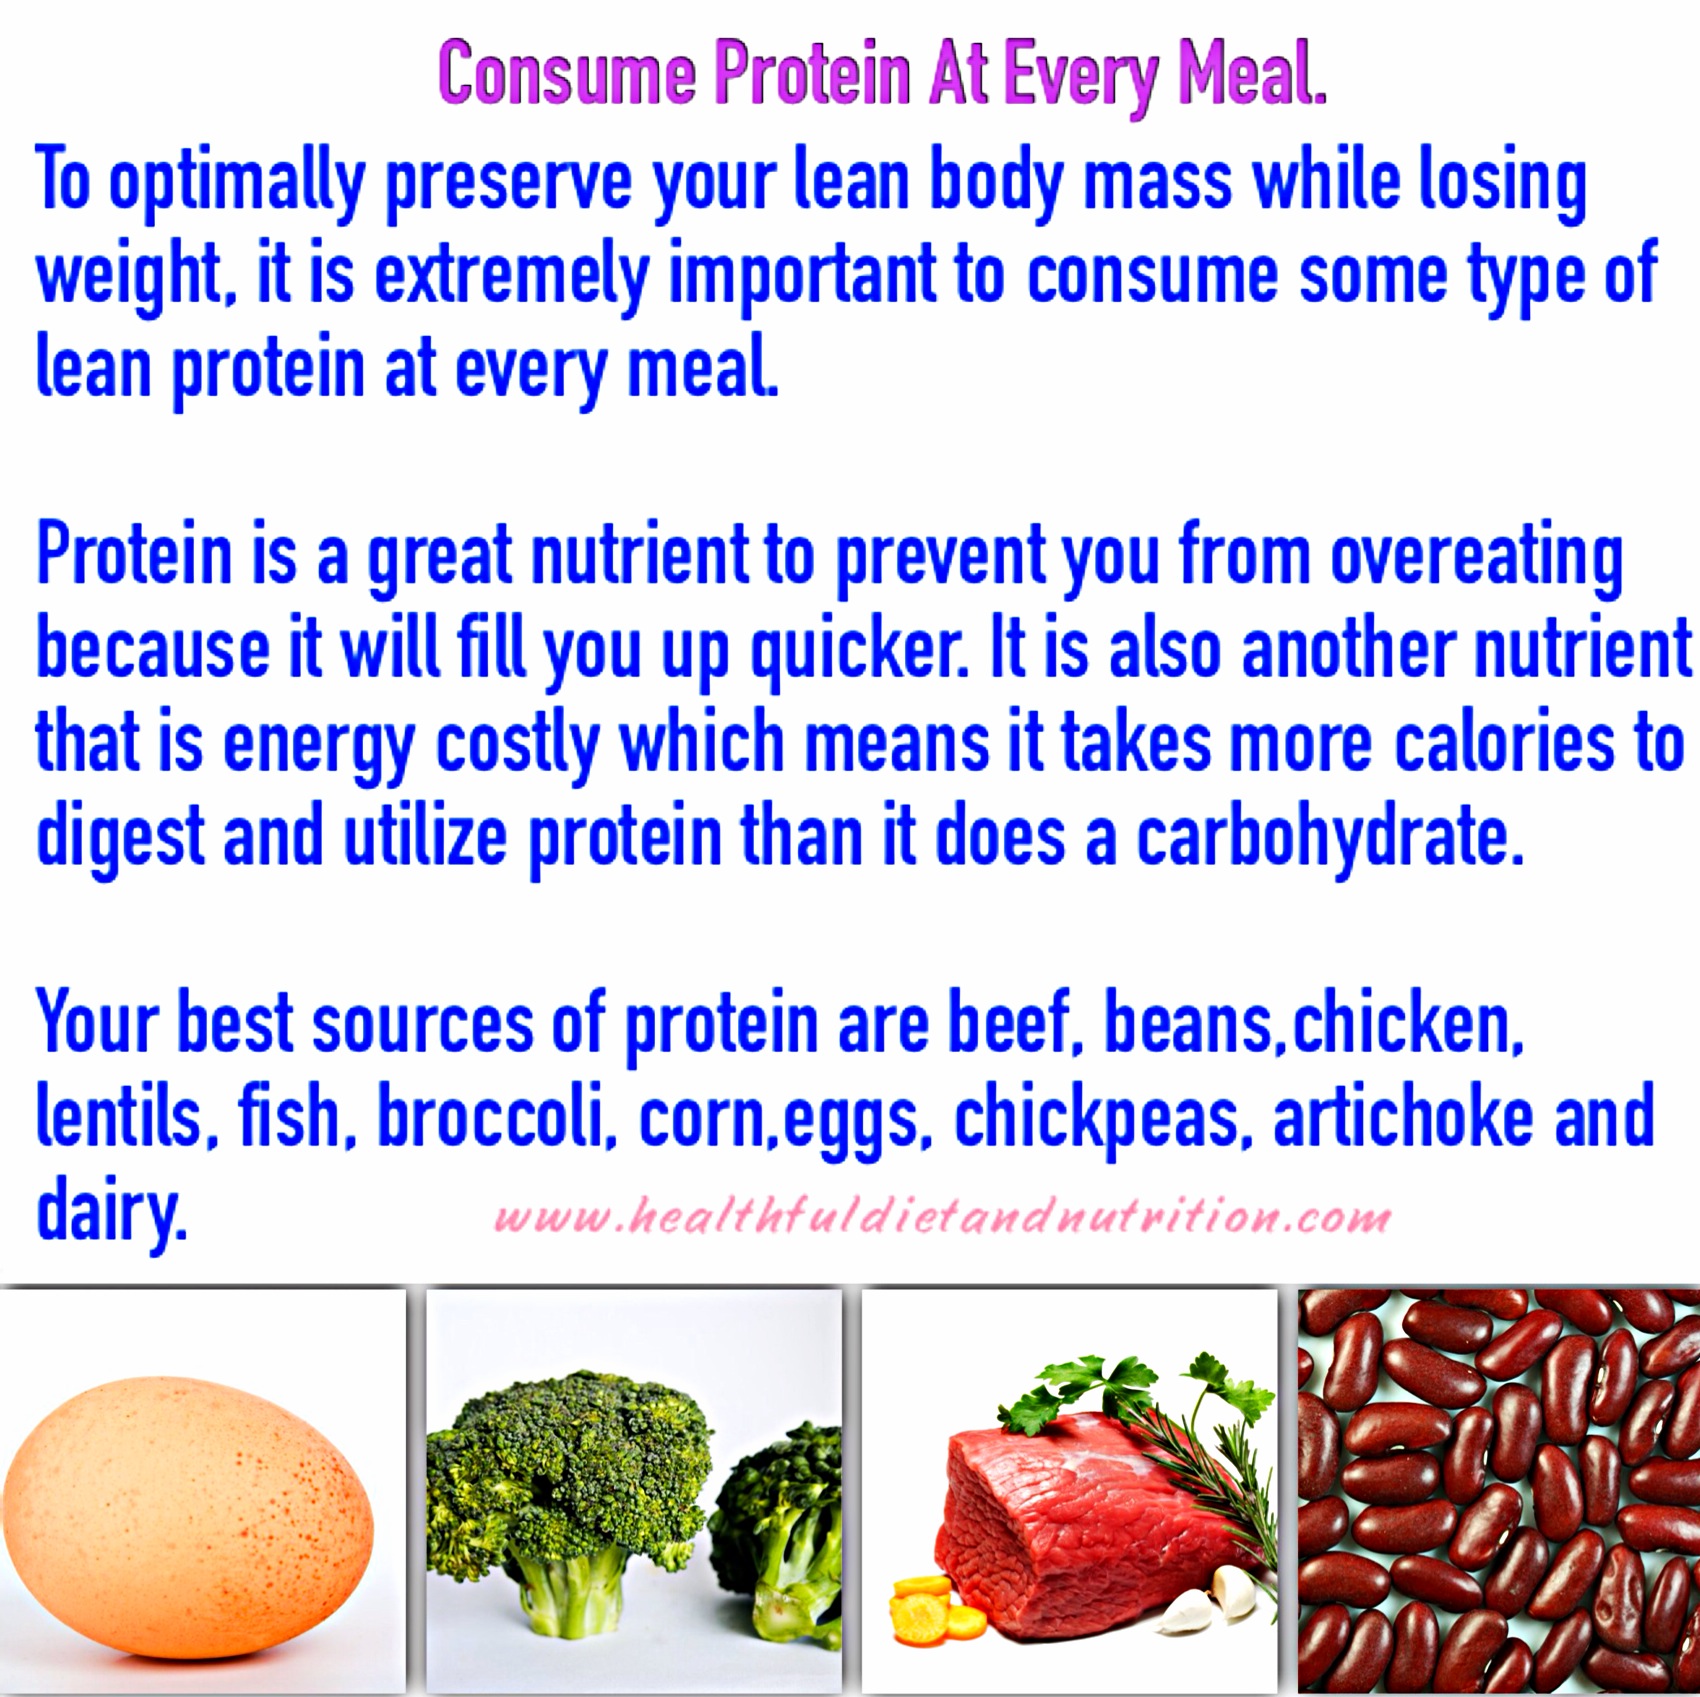 Consume Protein At Every Meal